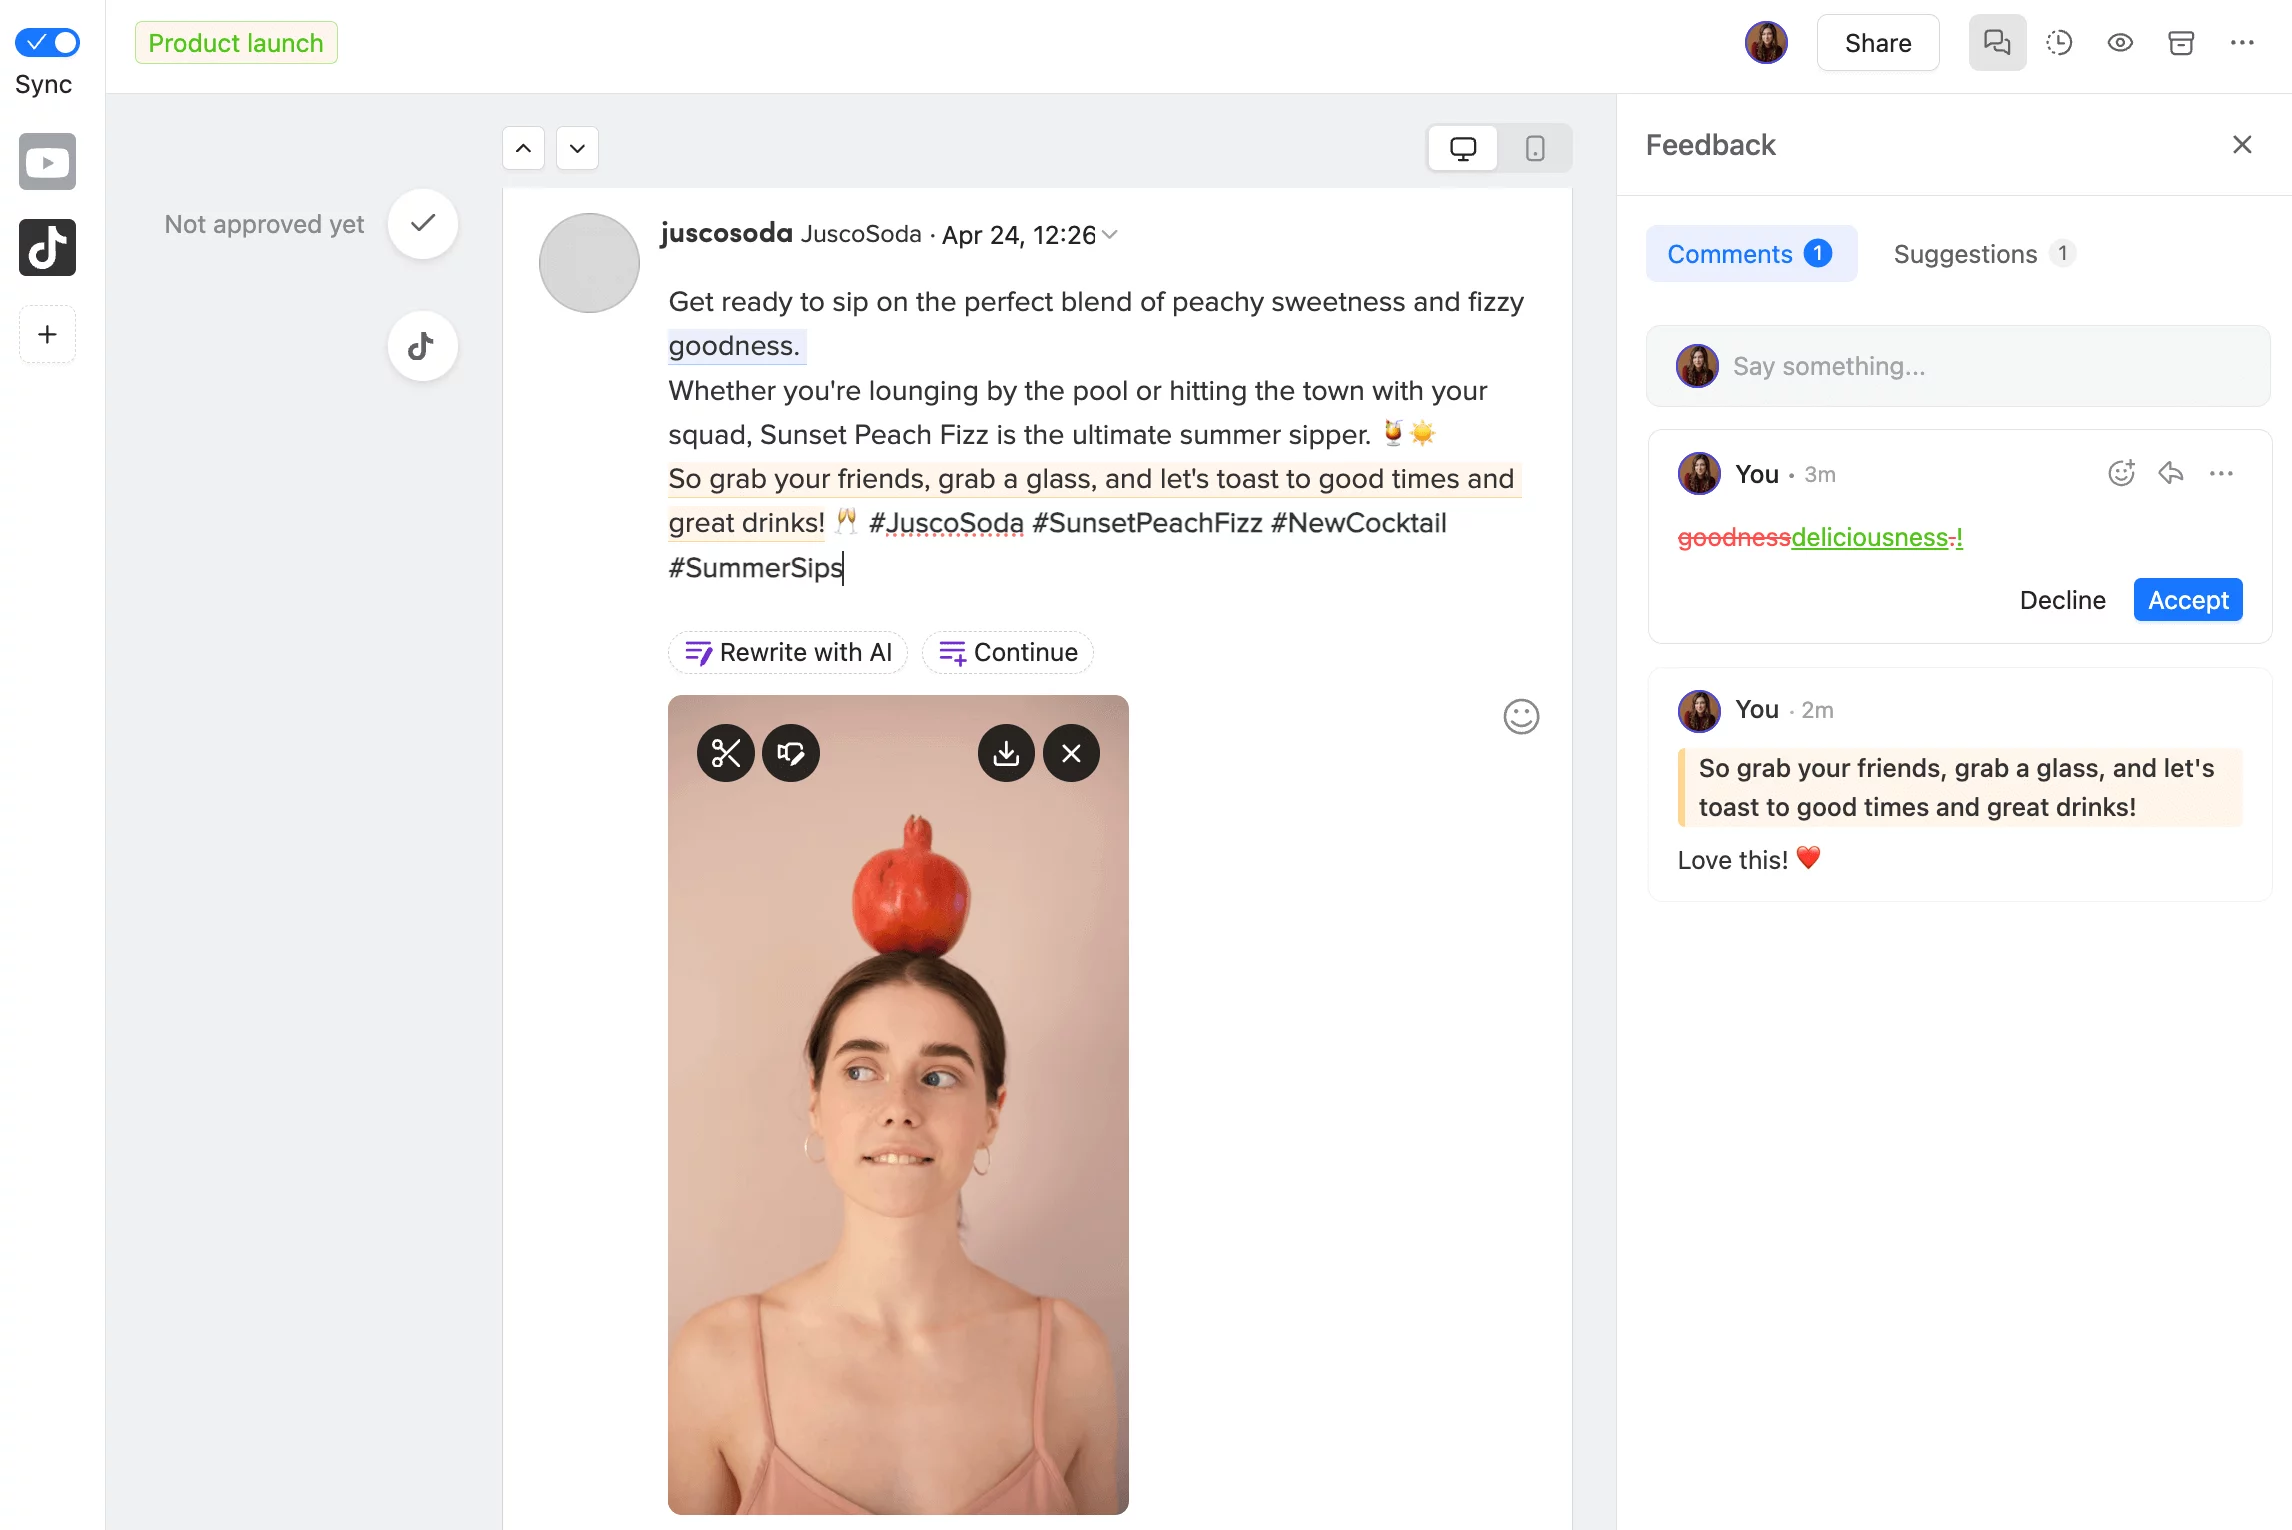 TikTok post with collaboration through comments, text suggestions, video editing options, and approval status.